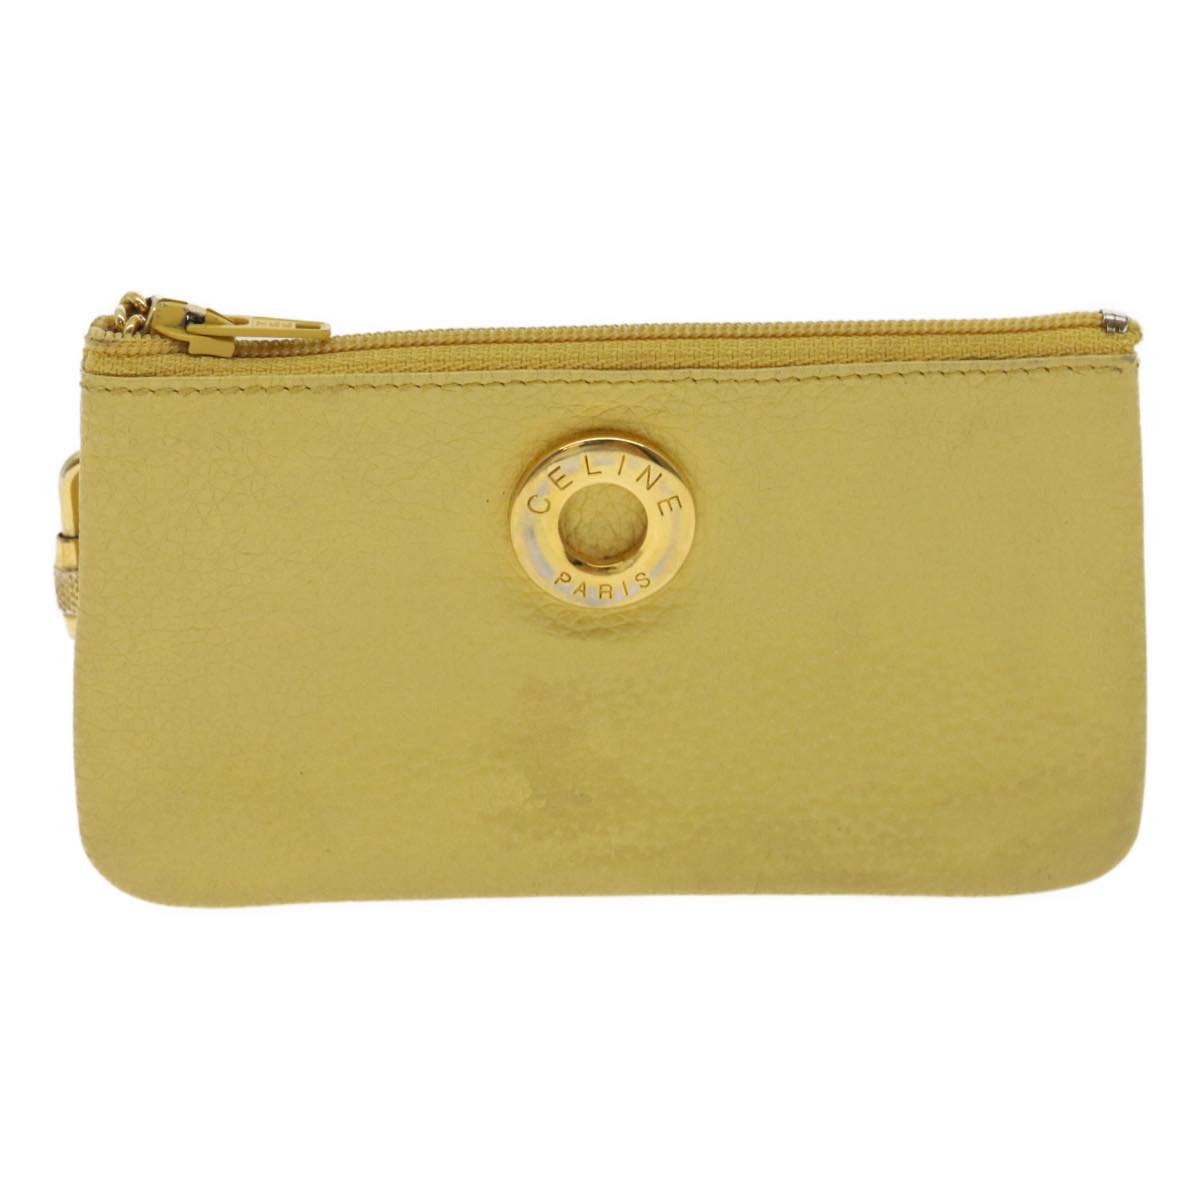 CELINE Coin Purse Leather Yellow Auth hk413